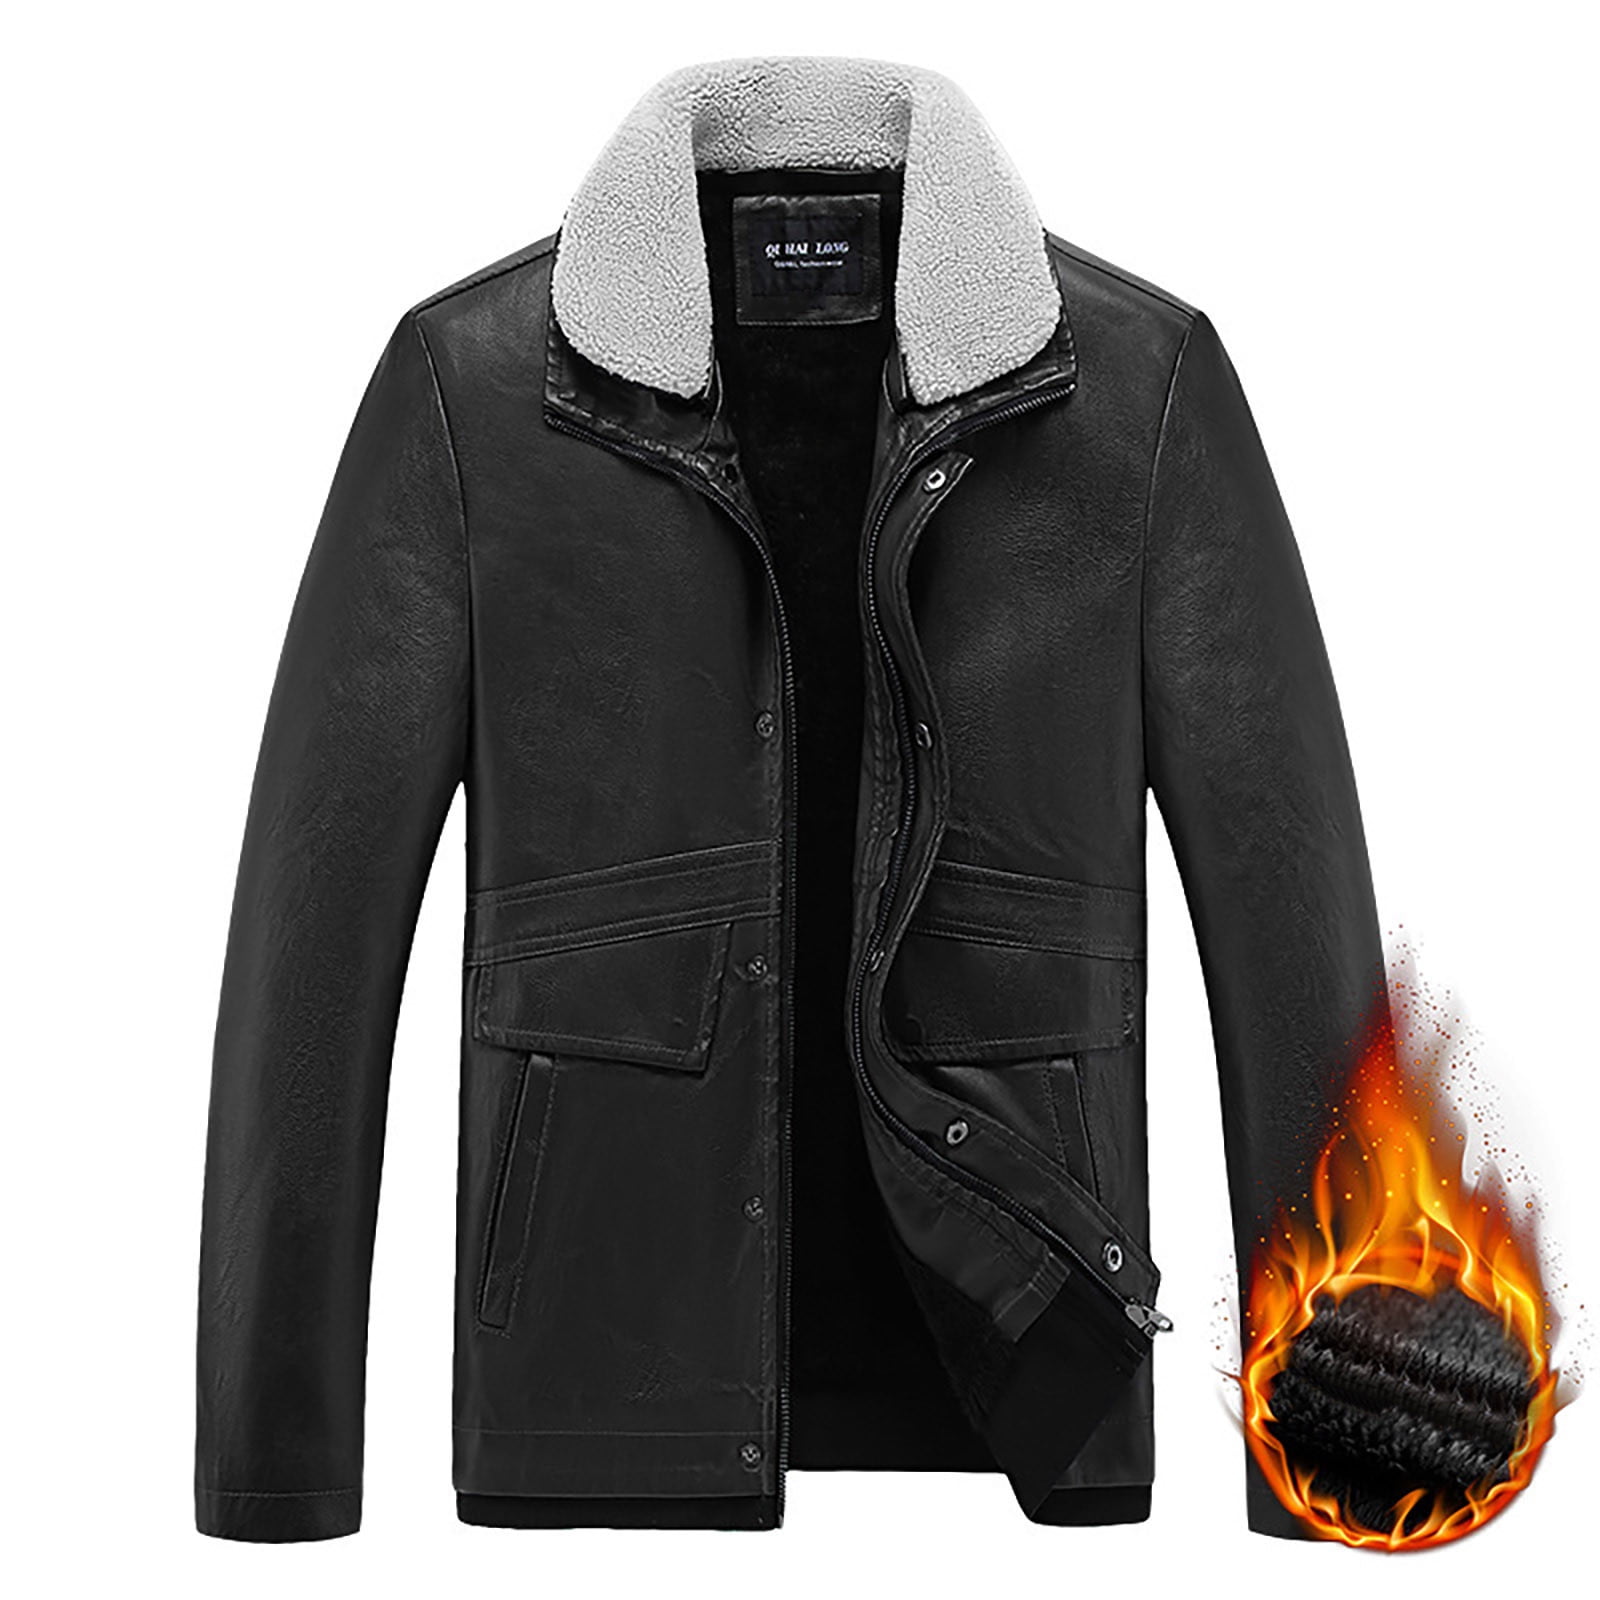 VBXOAE Leather Jacket for Mens Puffer Thickened Leather Jacket Long Sleeve  Stand Collar Zipper Winter Jacket with Pocket Warm Windproof Coat 